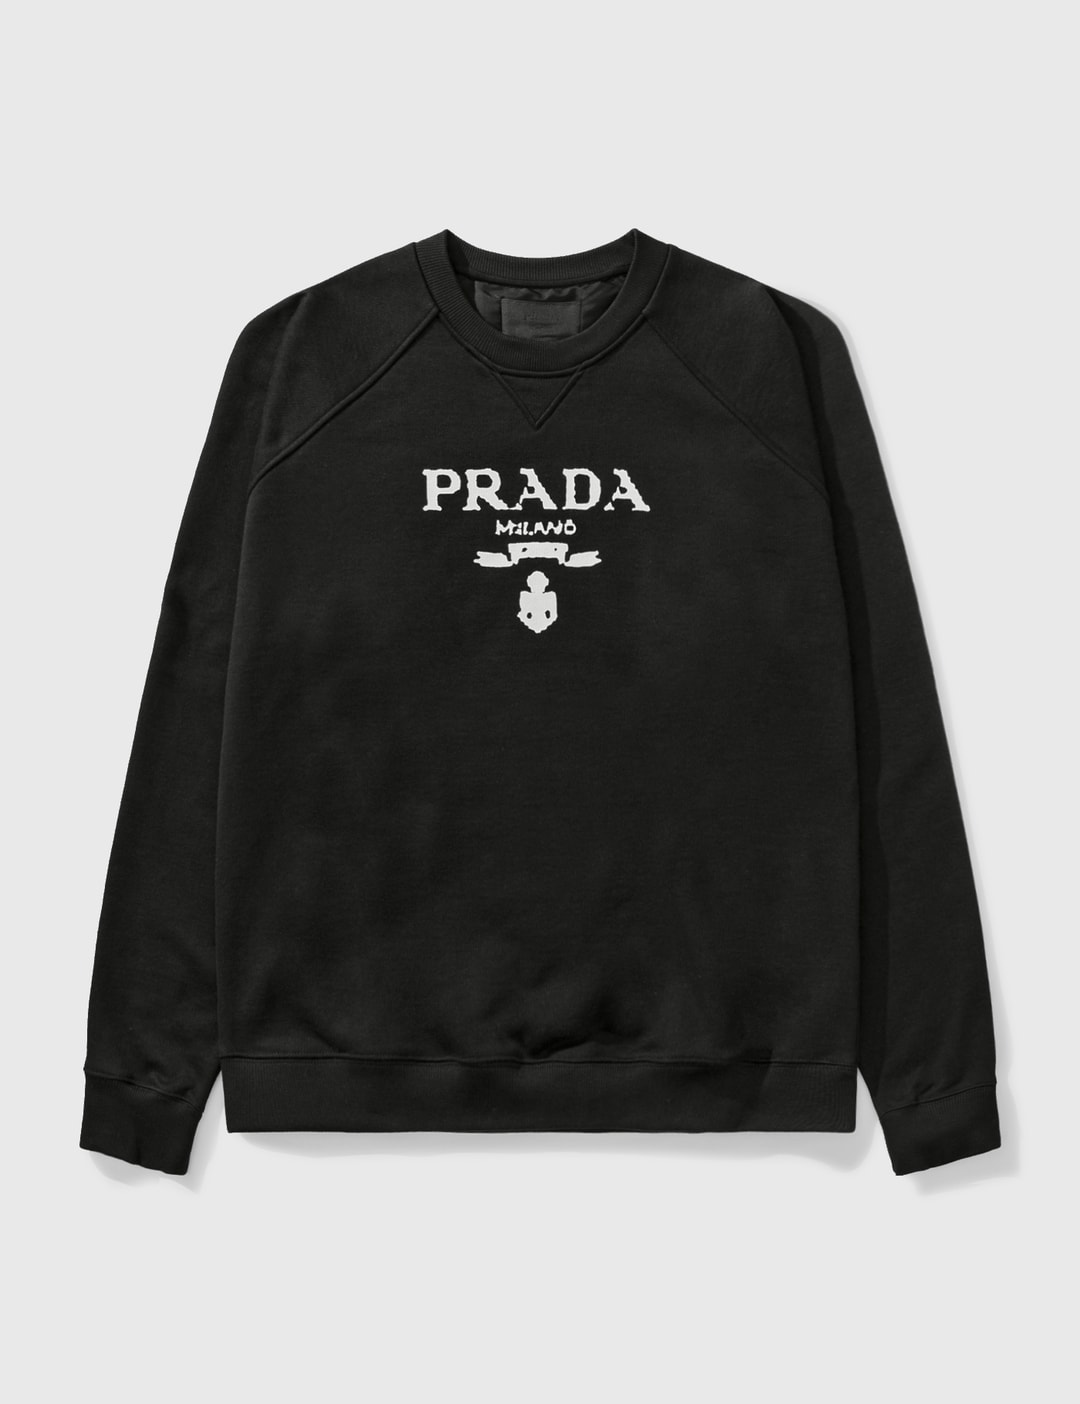 Prada - Mountain Cotton Sweatshirt | HBX - Globally Curated Fashion and  Lifestyle by Hypebeast